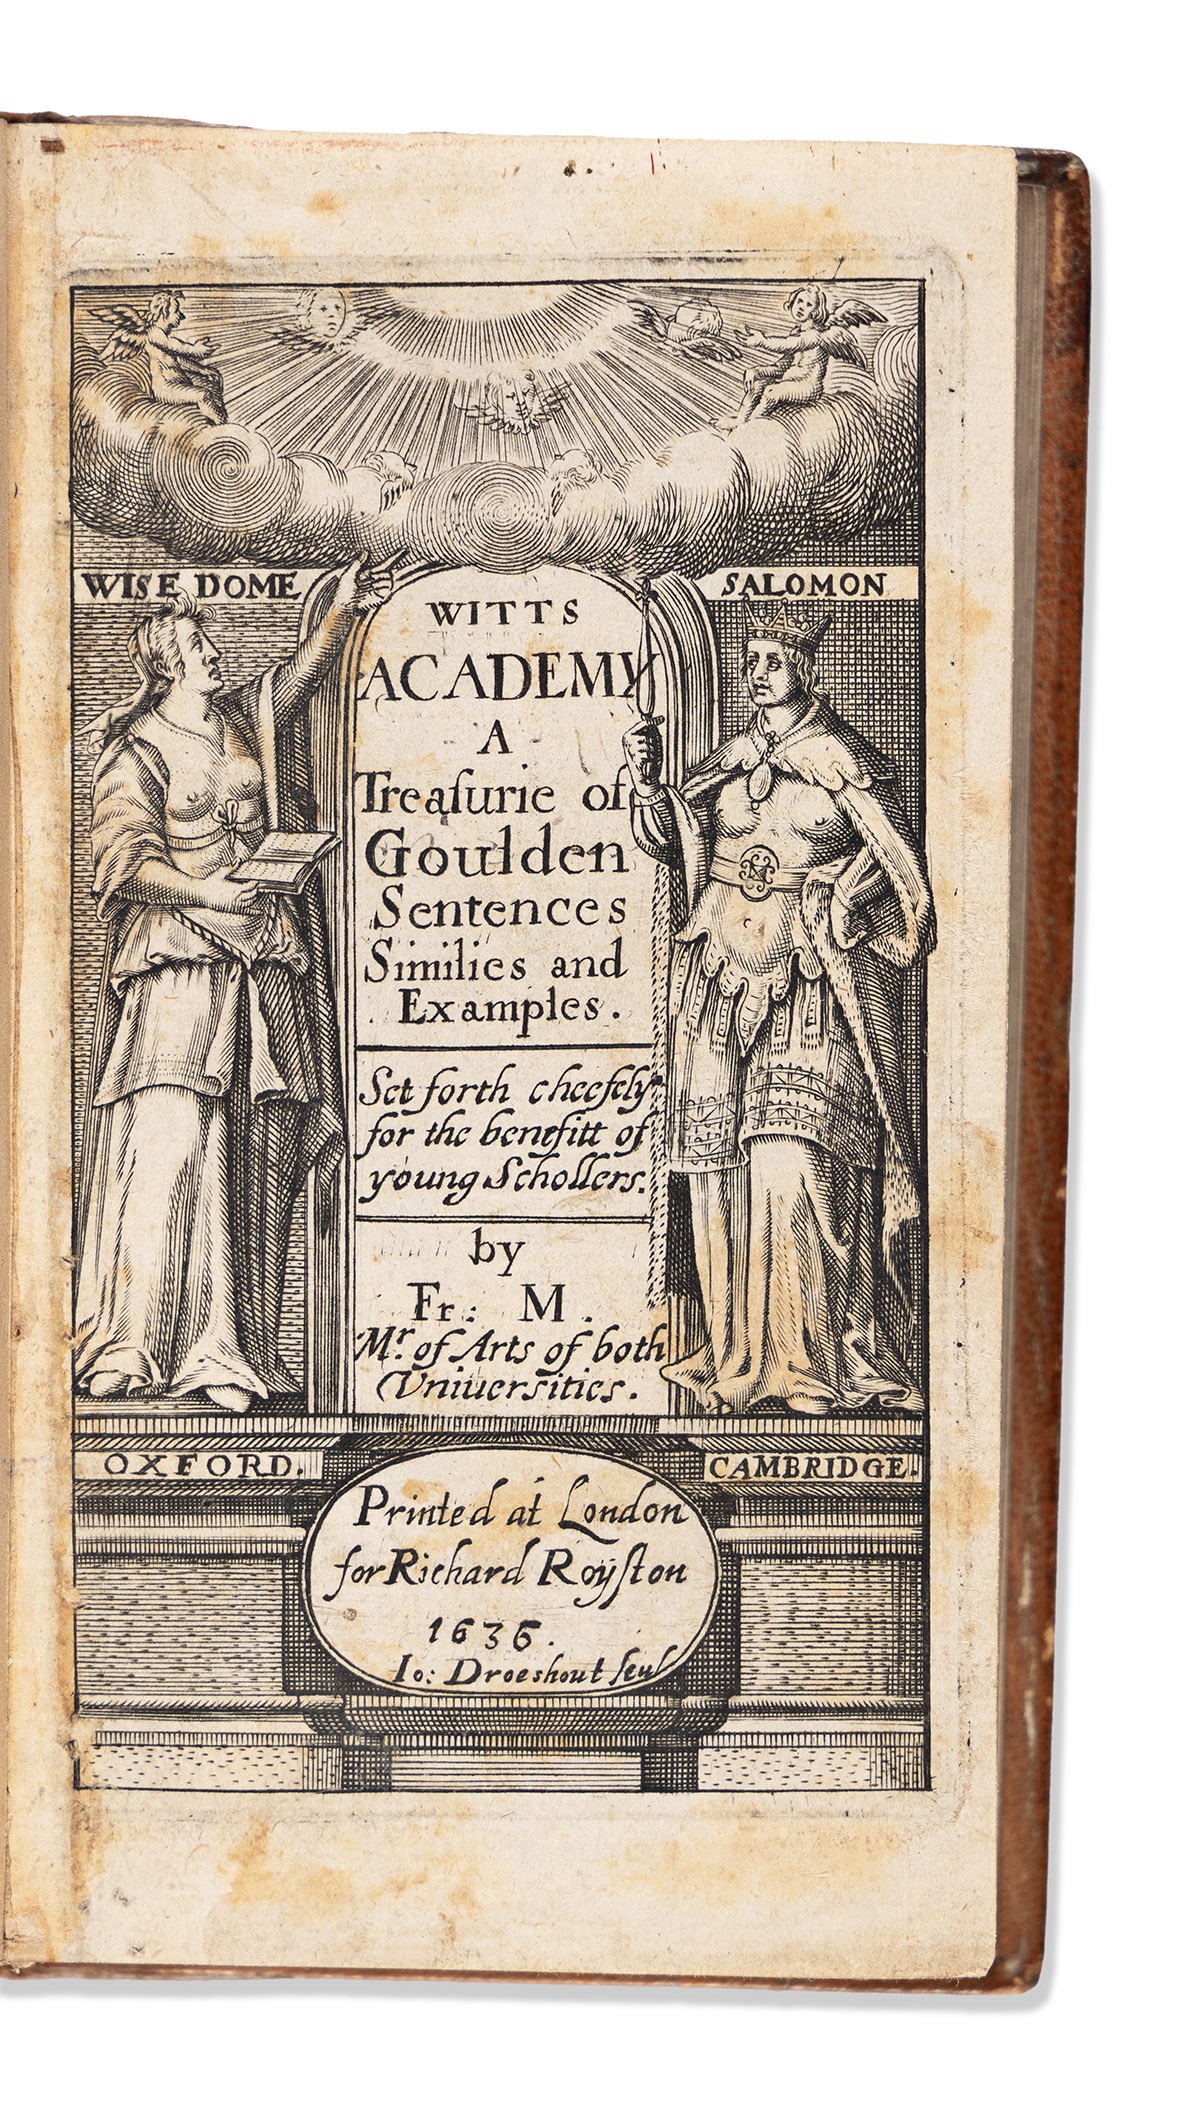 Meres, Francis (1565-1647) Witts Academy. A Treasurie of Goulden Sentences, Similies and Examples.